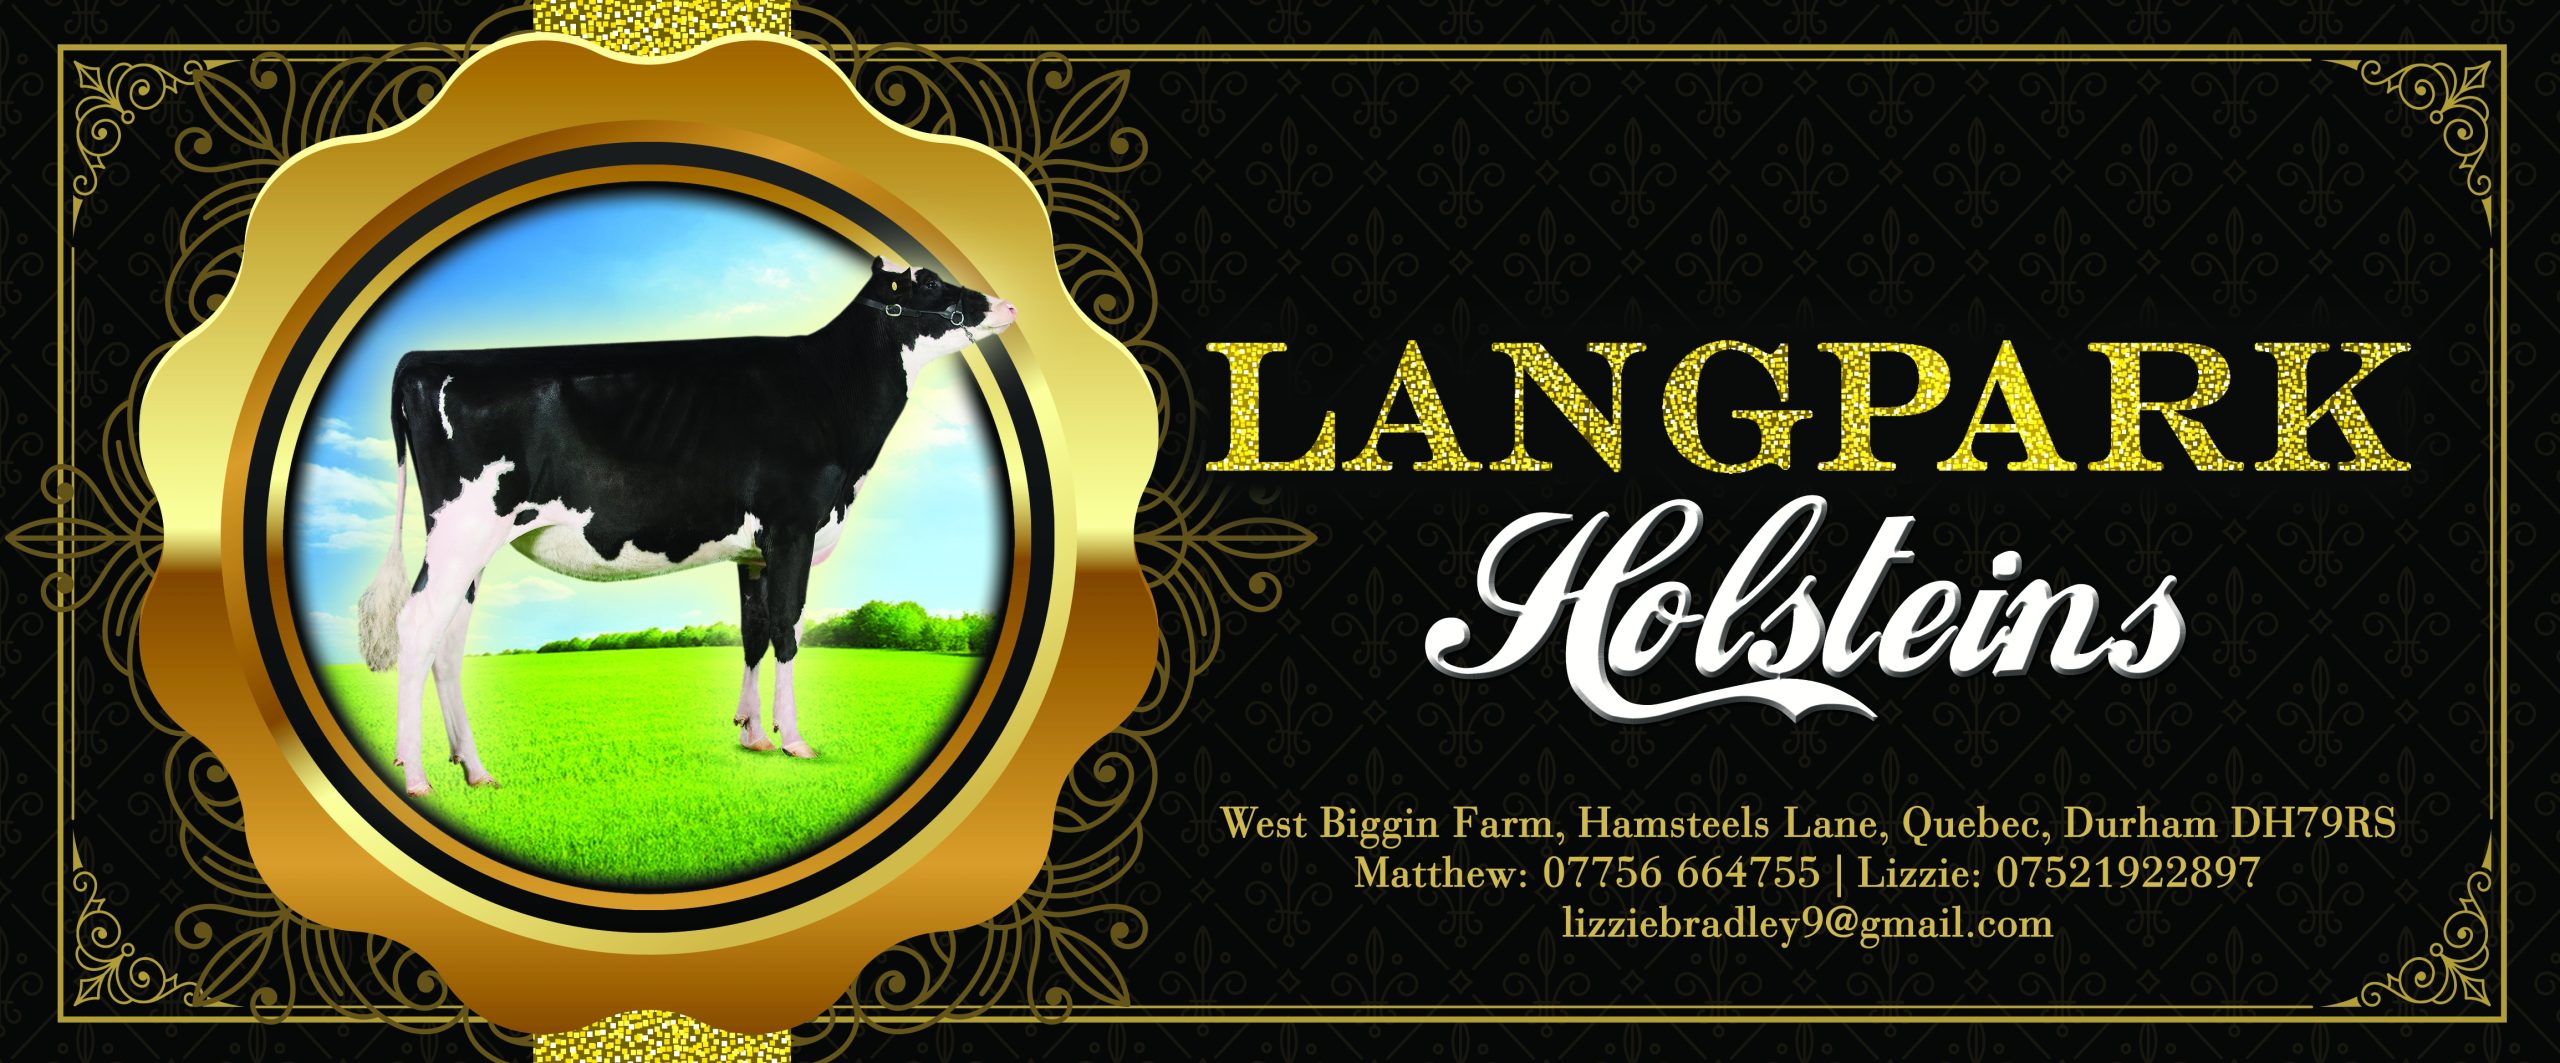 products-langpark_holsteins_banner_5x2-scaled